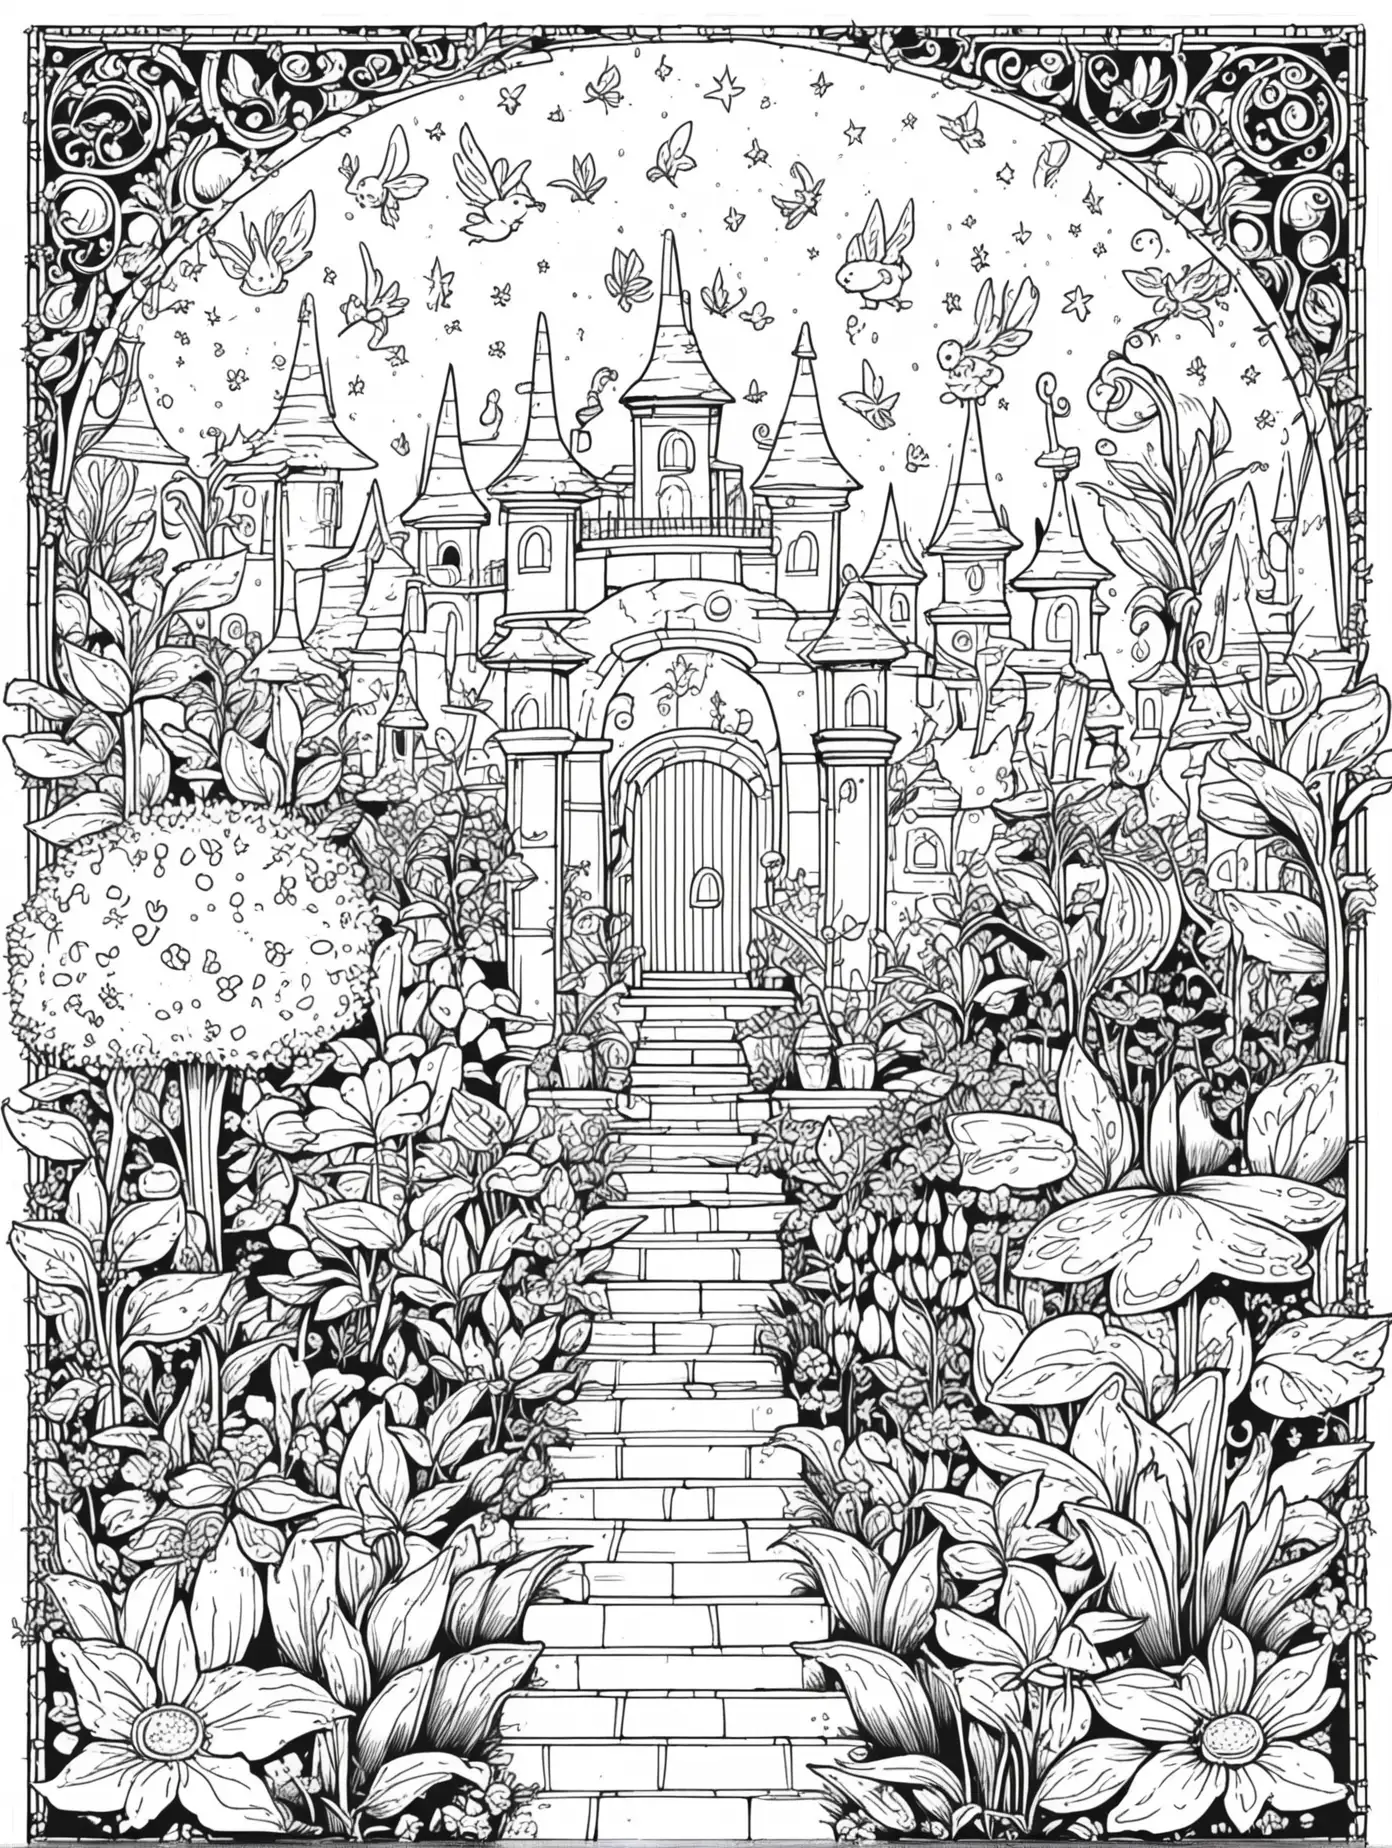 Magical fantasy garden white and black coloring pages cartoon style thin lines few details no background no shadows. 